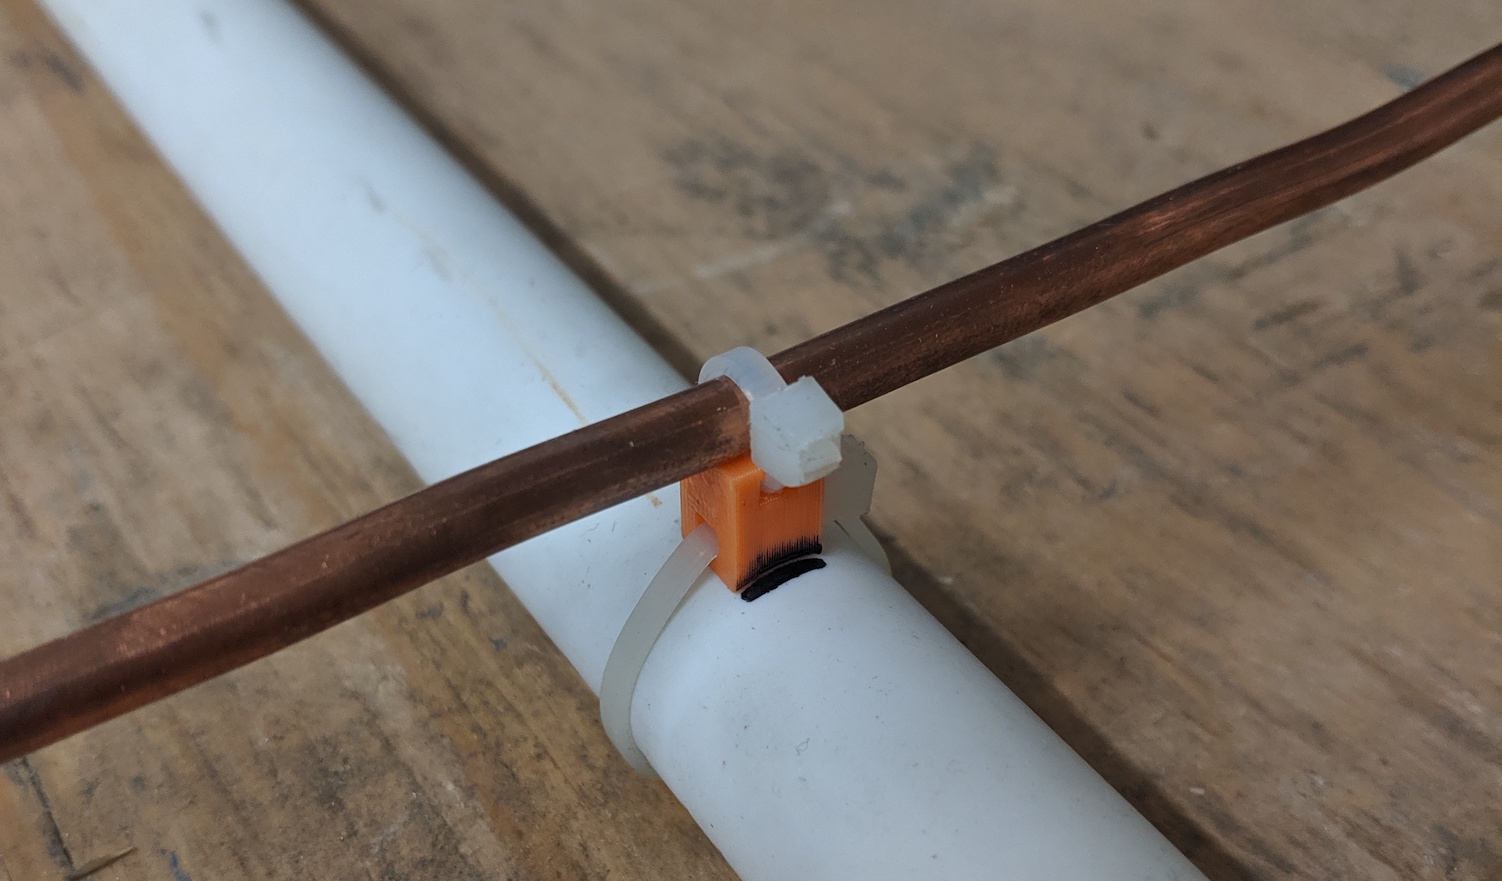 Photo of an antenna element that is zip-tied to a 3d-printed standoff that is zip-tied to a PVC pipe with a Sharpie mark on the PVC pipe